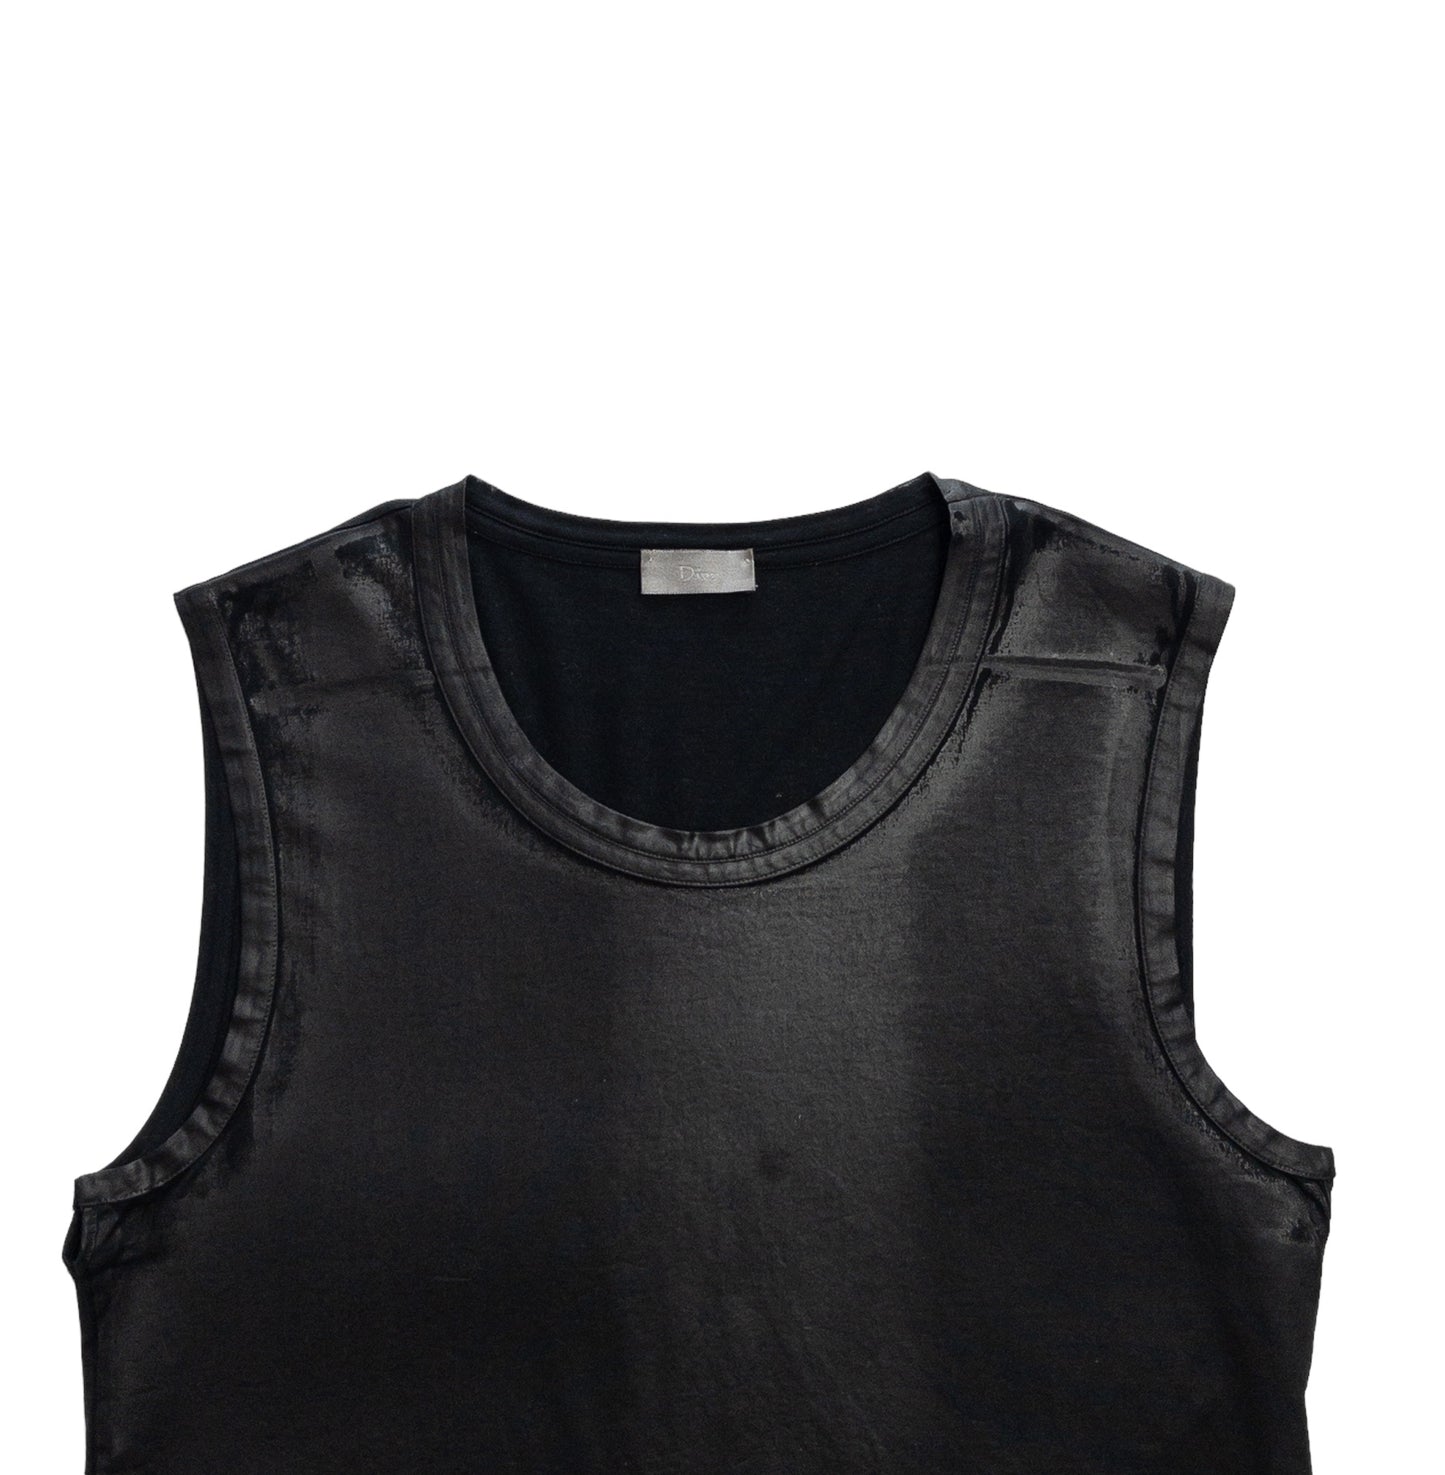 Dior Homme AW03 'Luster' Wax Tank Top